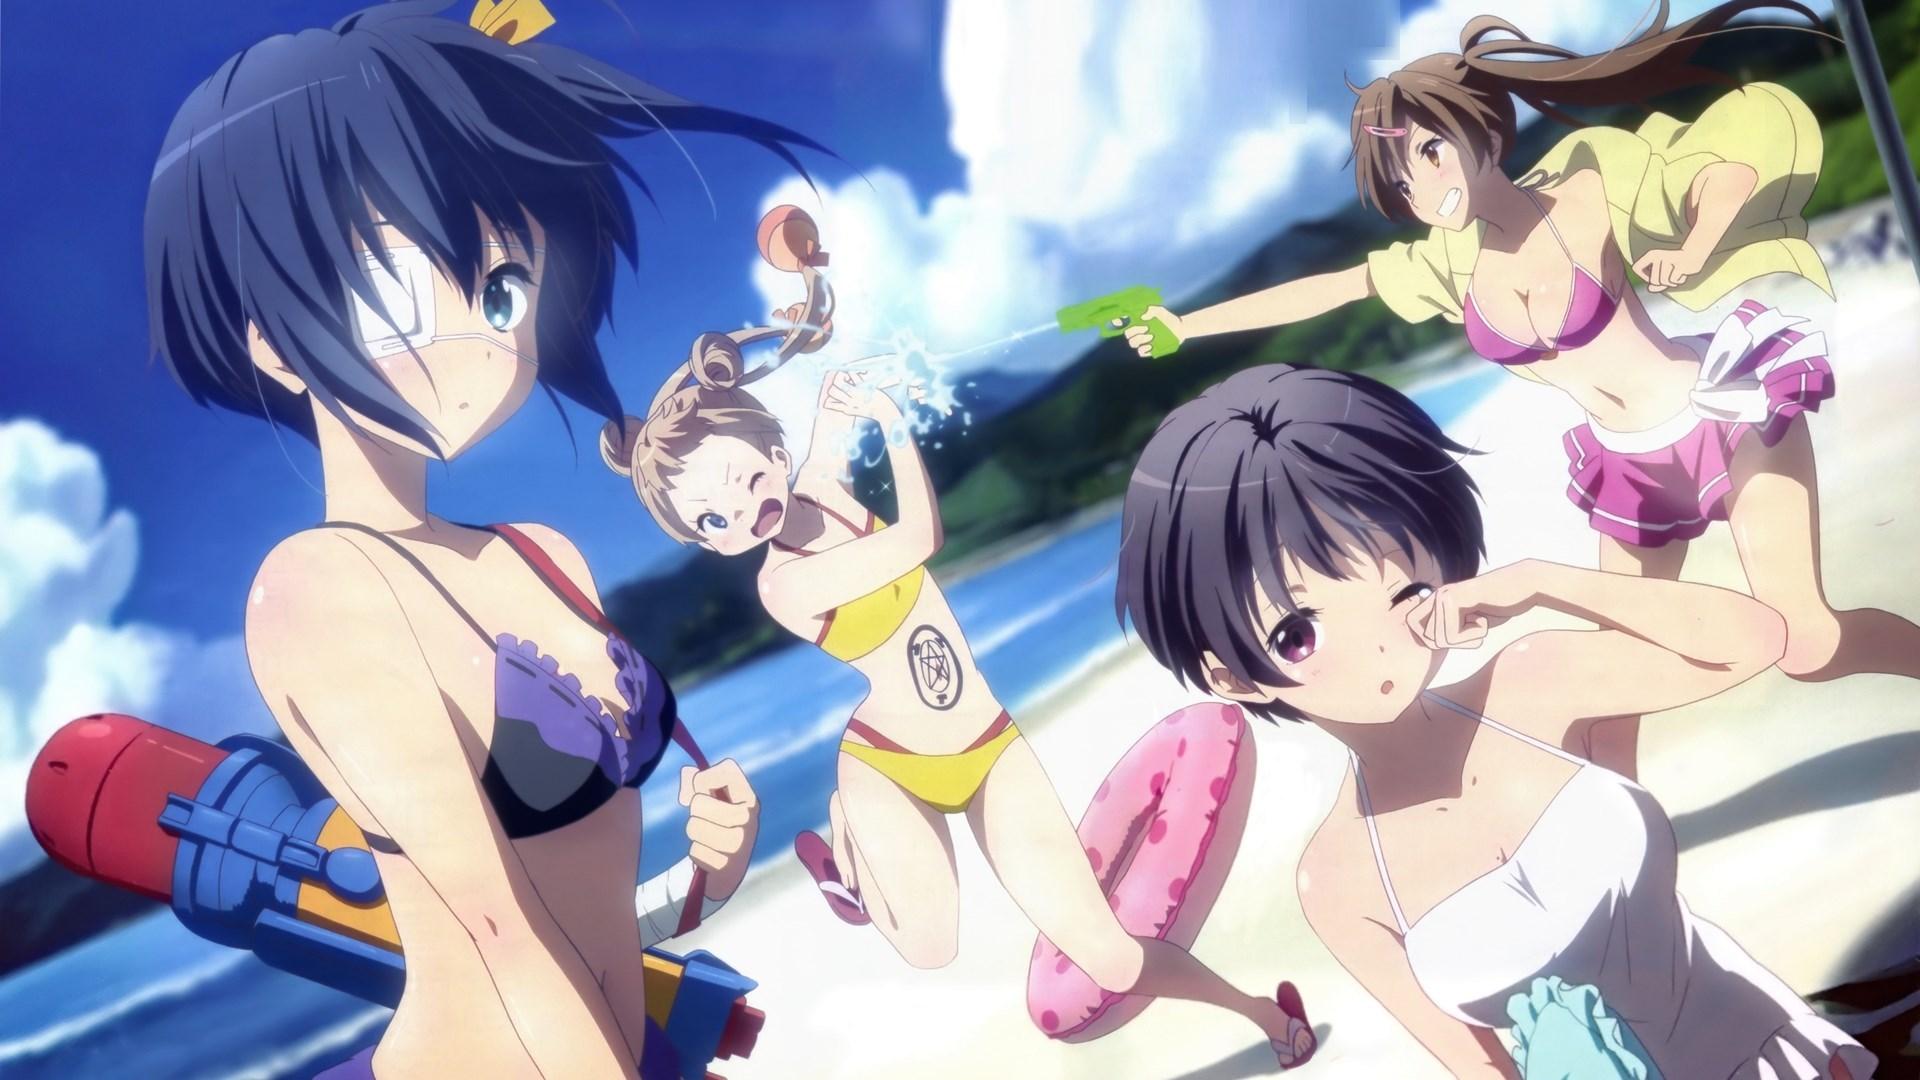 Love, Chunibyo & Other Delusions Backgrounds, Compatible - PC, Mobile, Gadgets| 1920x1080 px